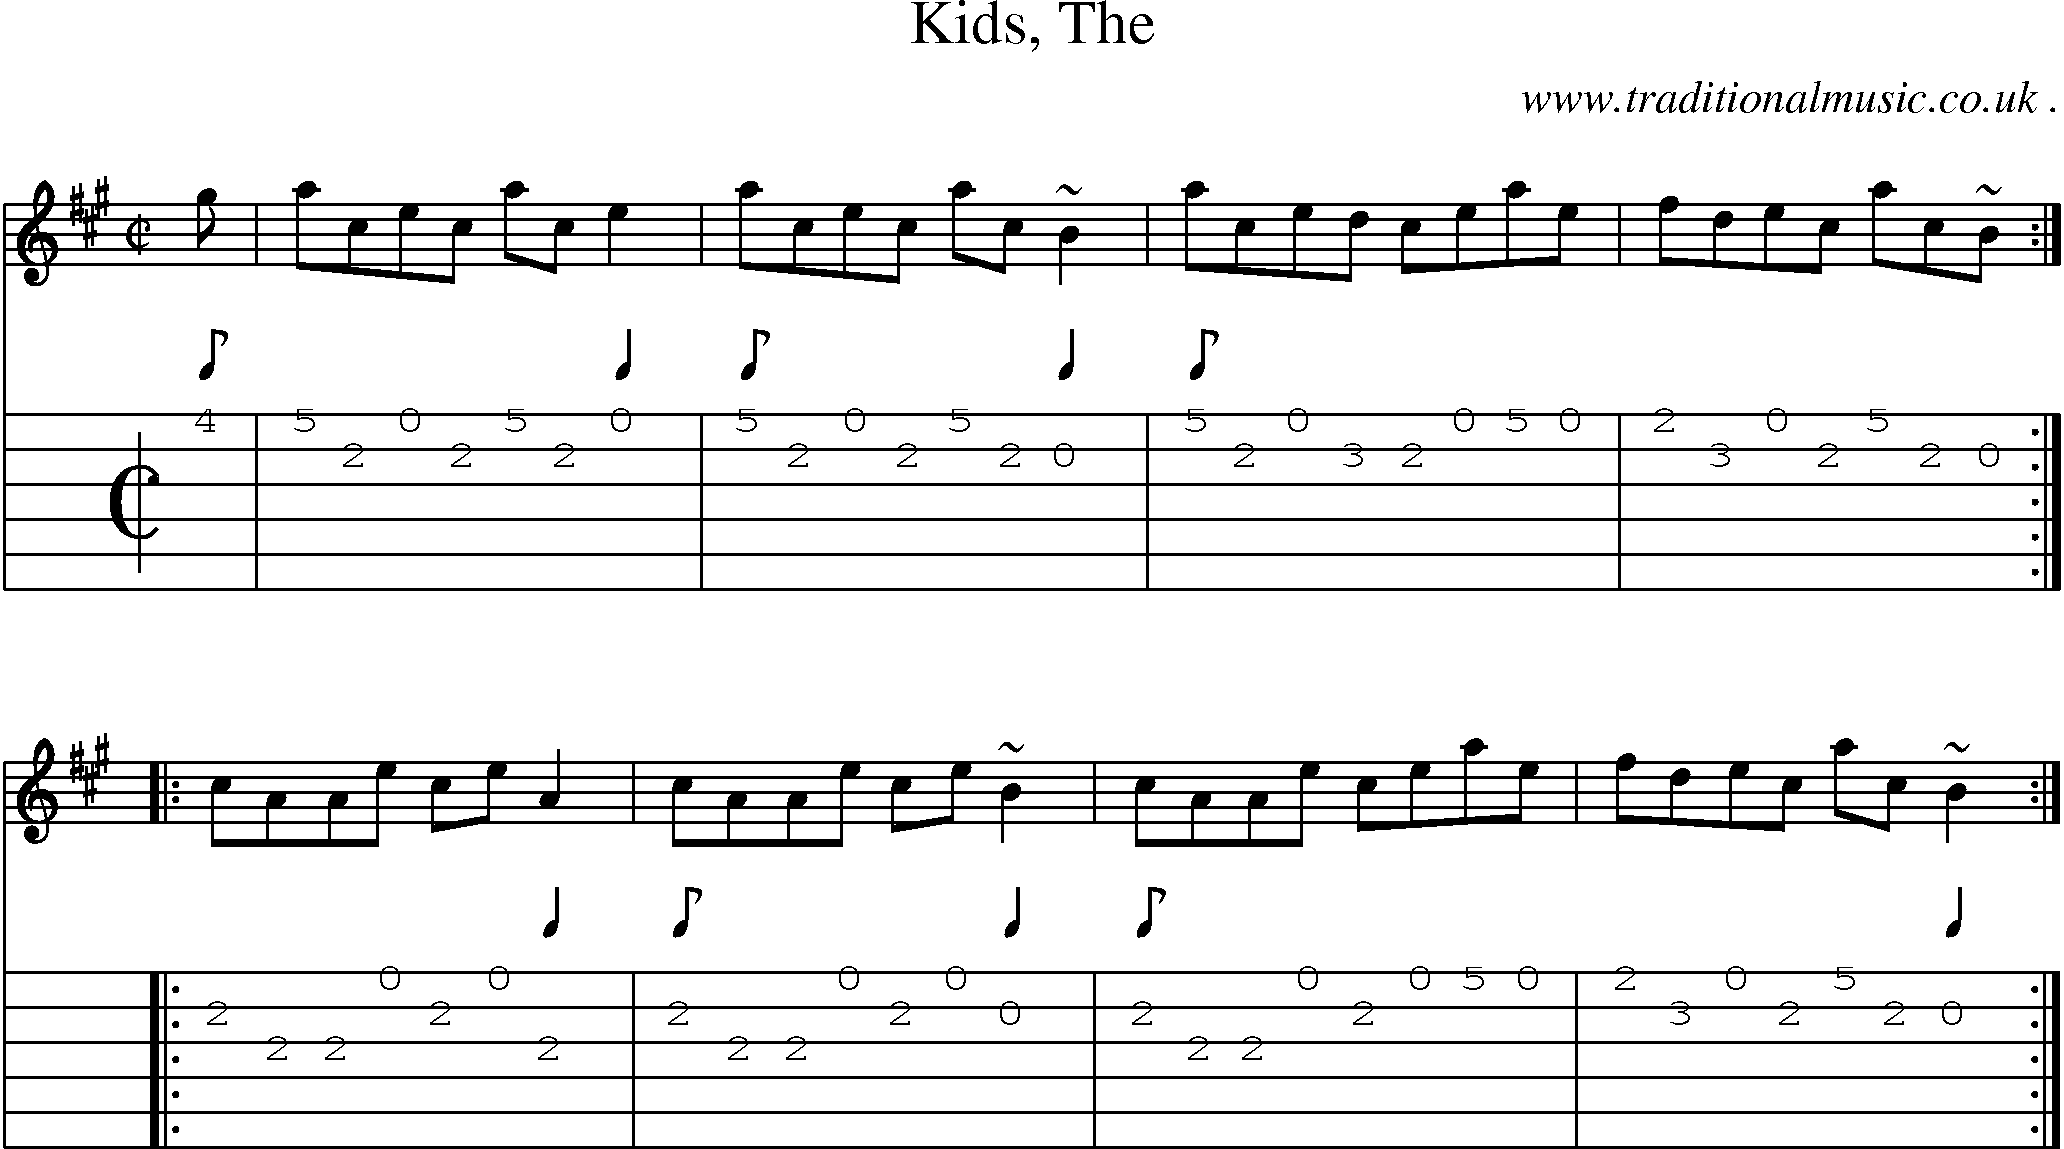 Sheet-music  score, Chords and Guitar Tabs for Kids The